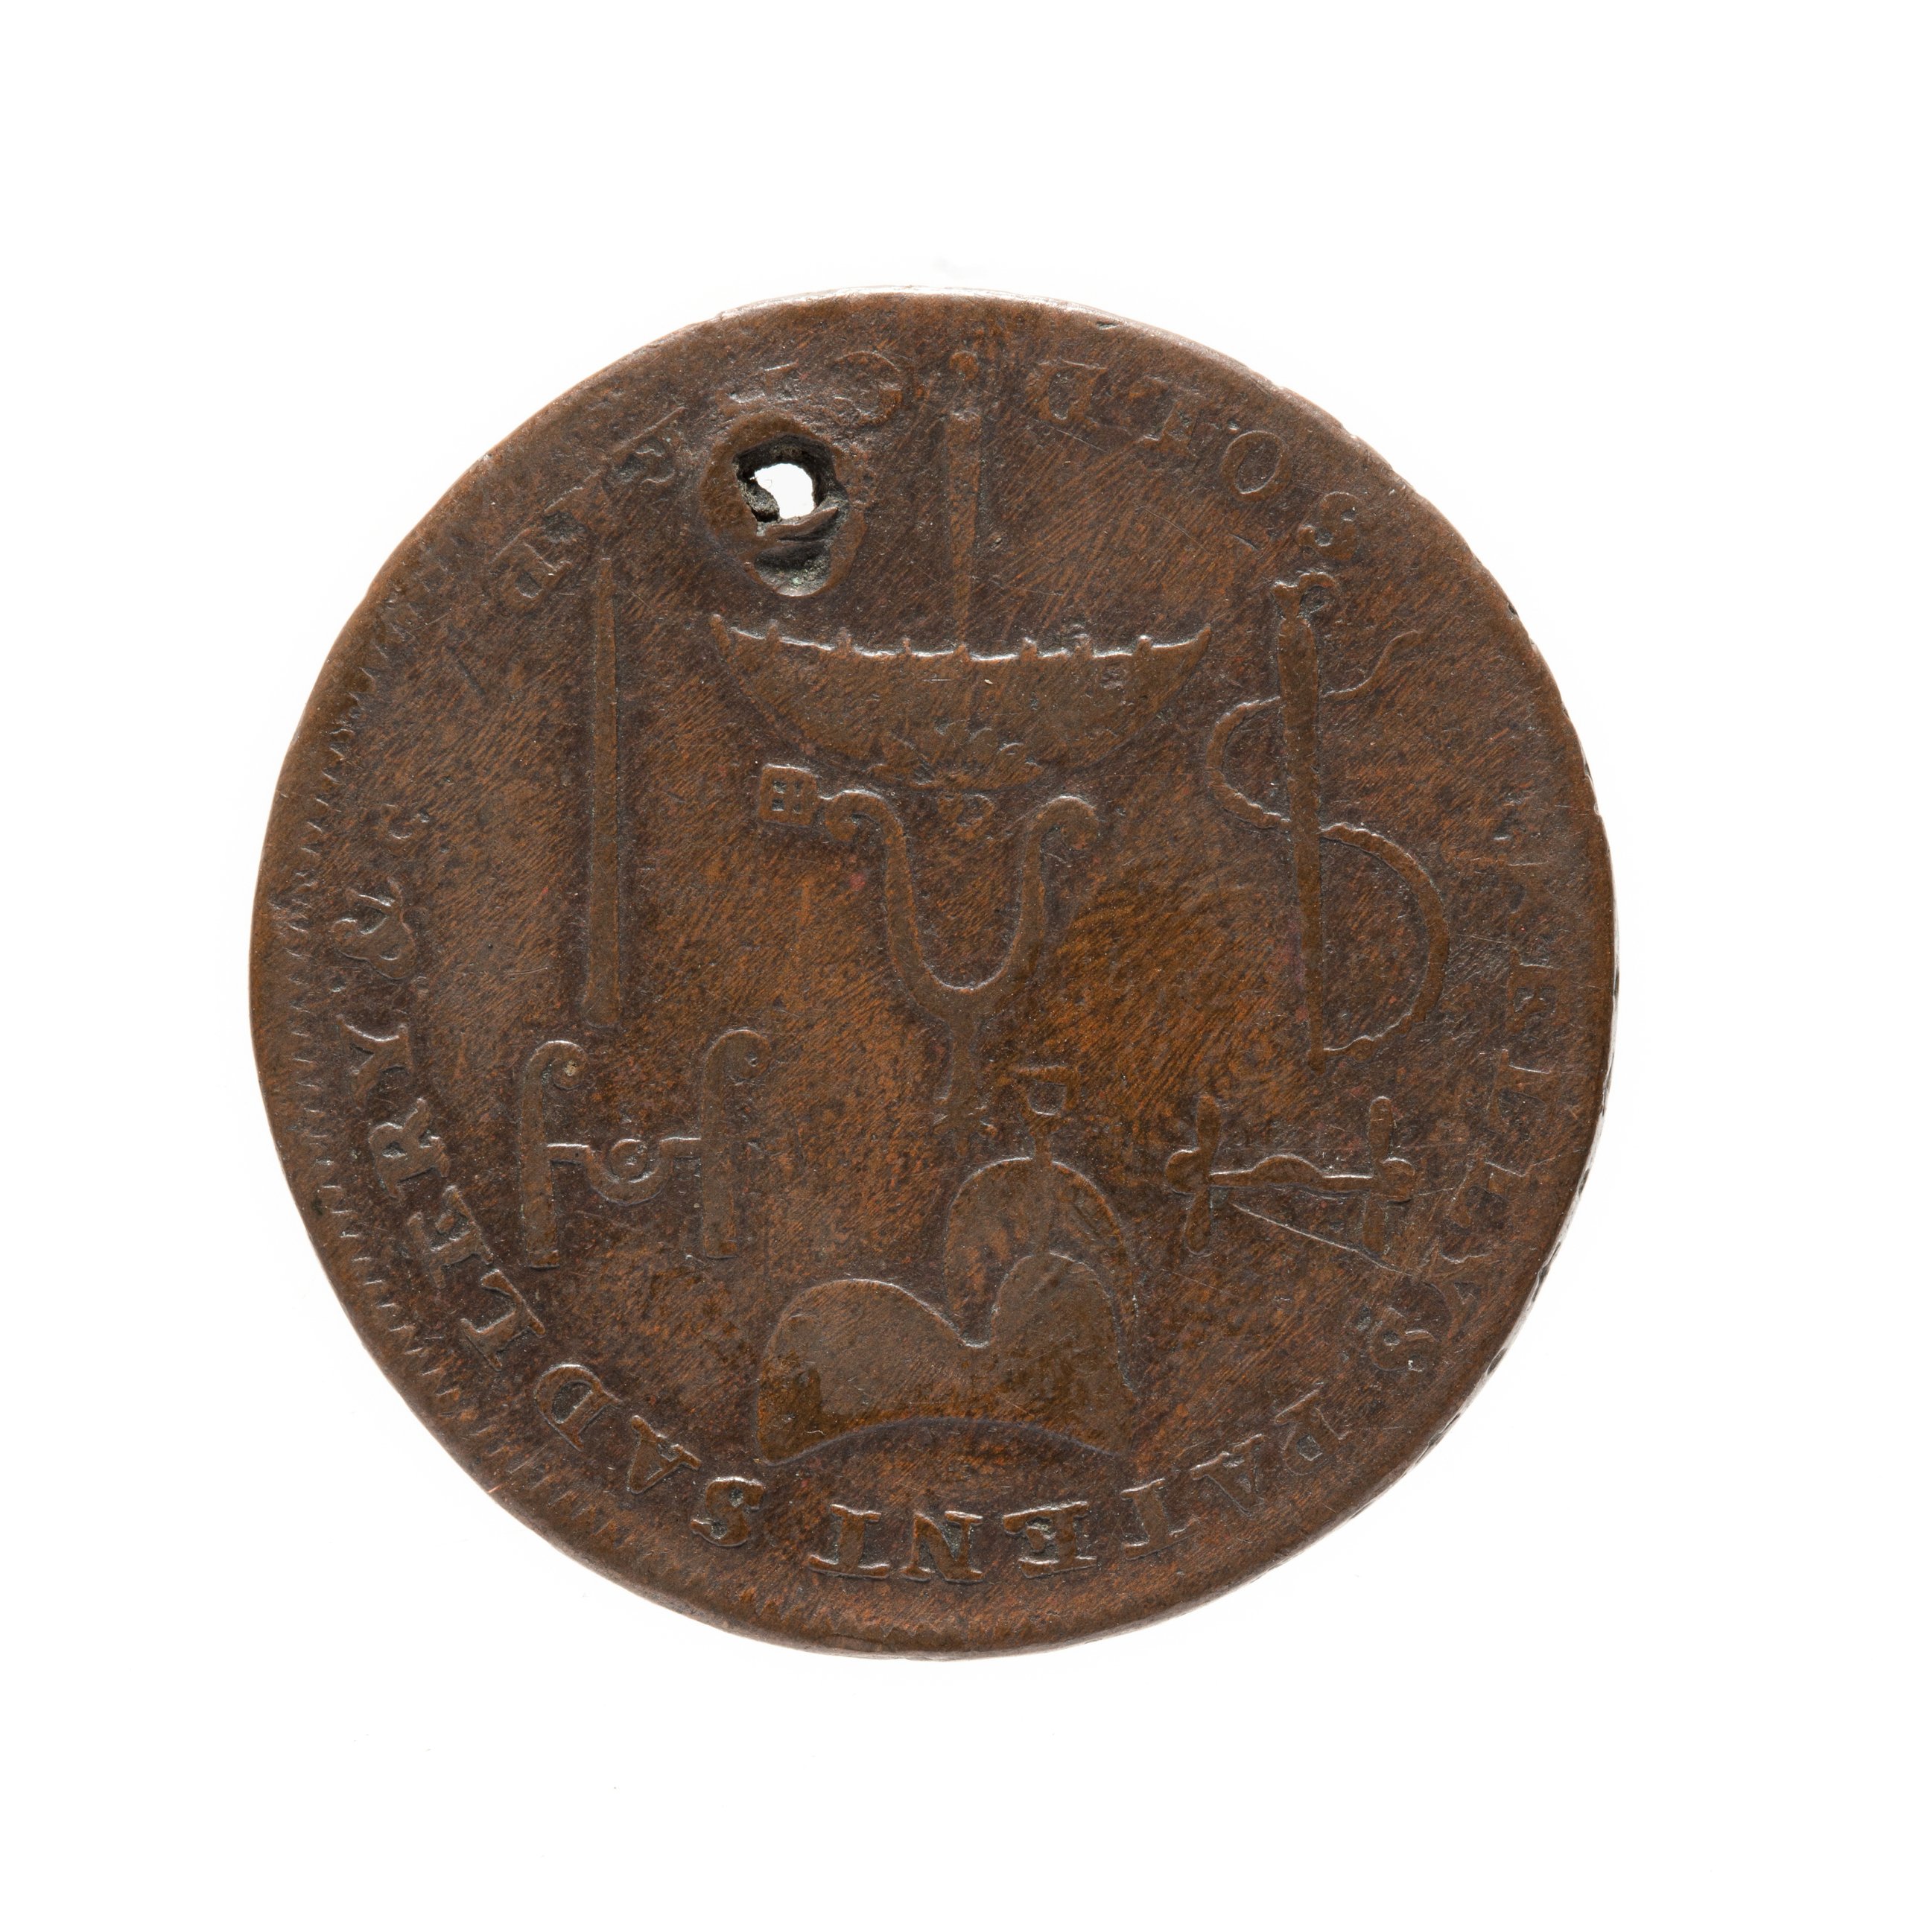 English Halfpenny token for Kelly's Patent Saddlery